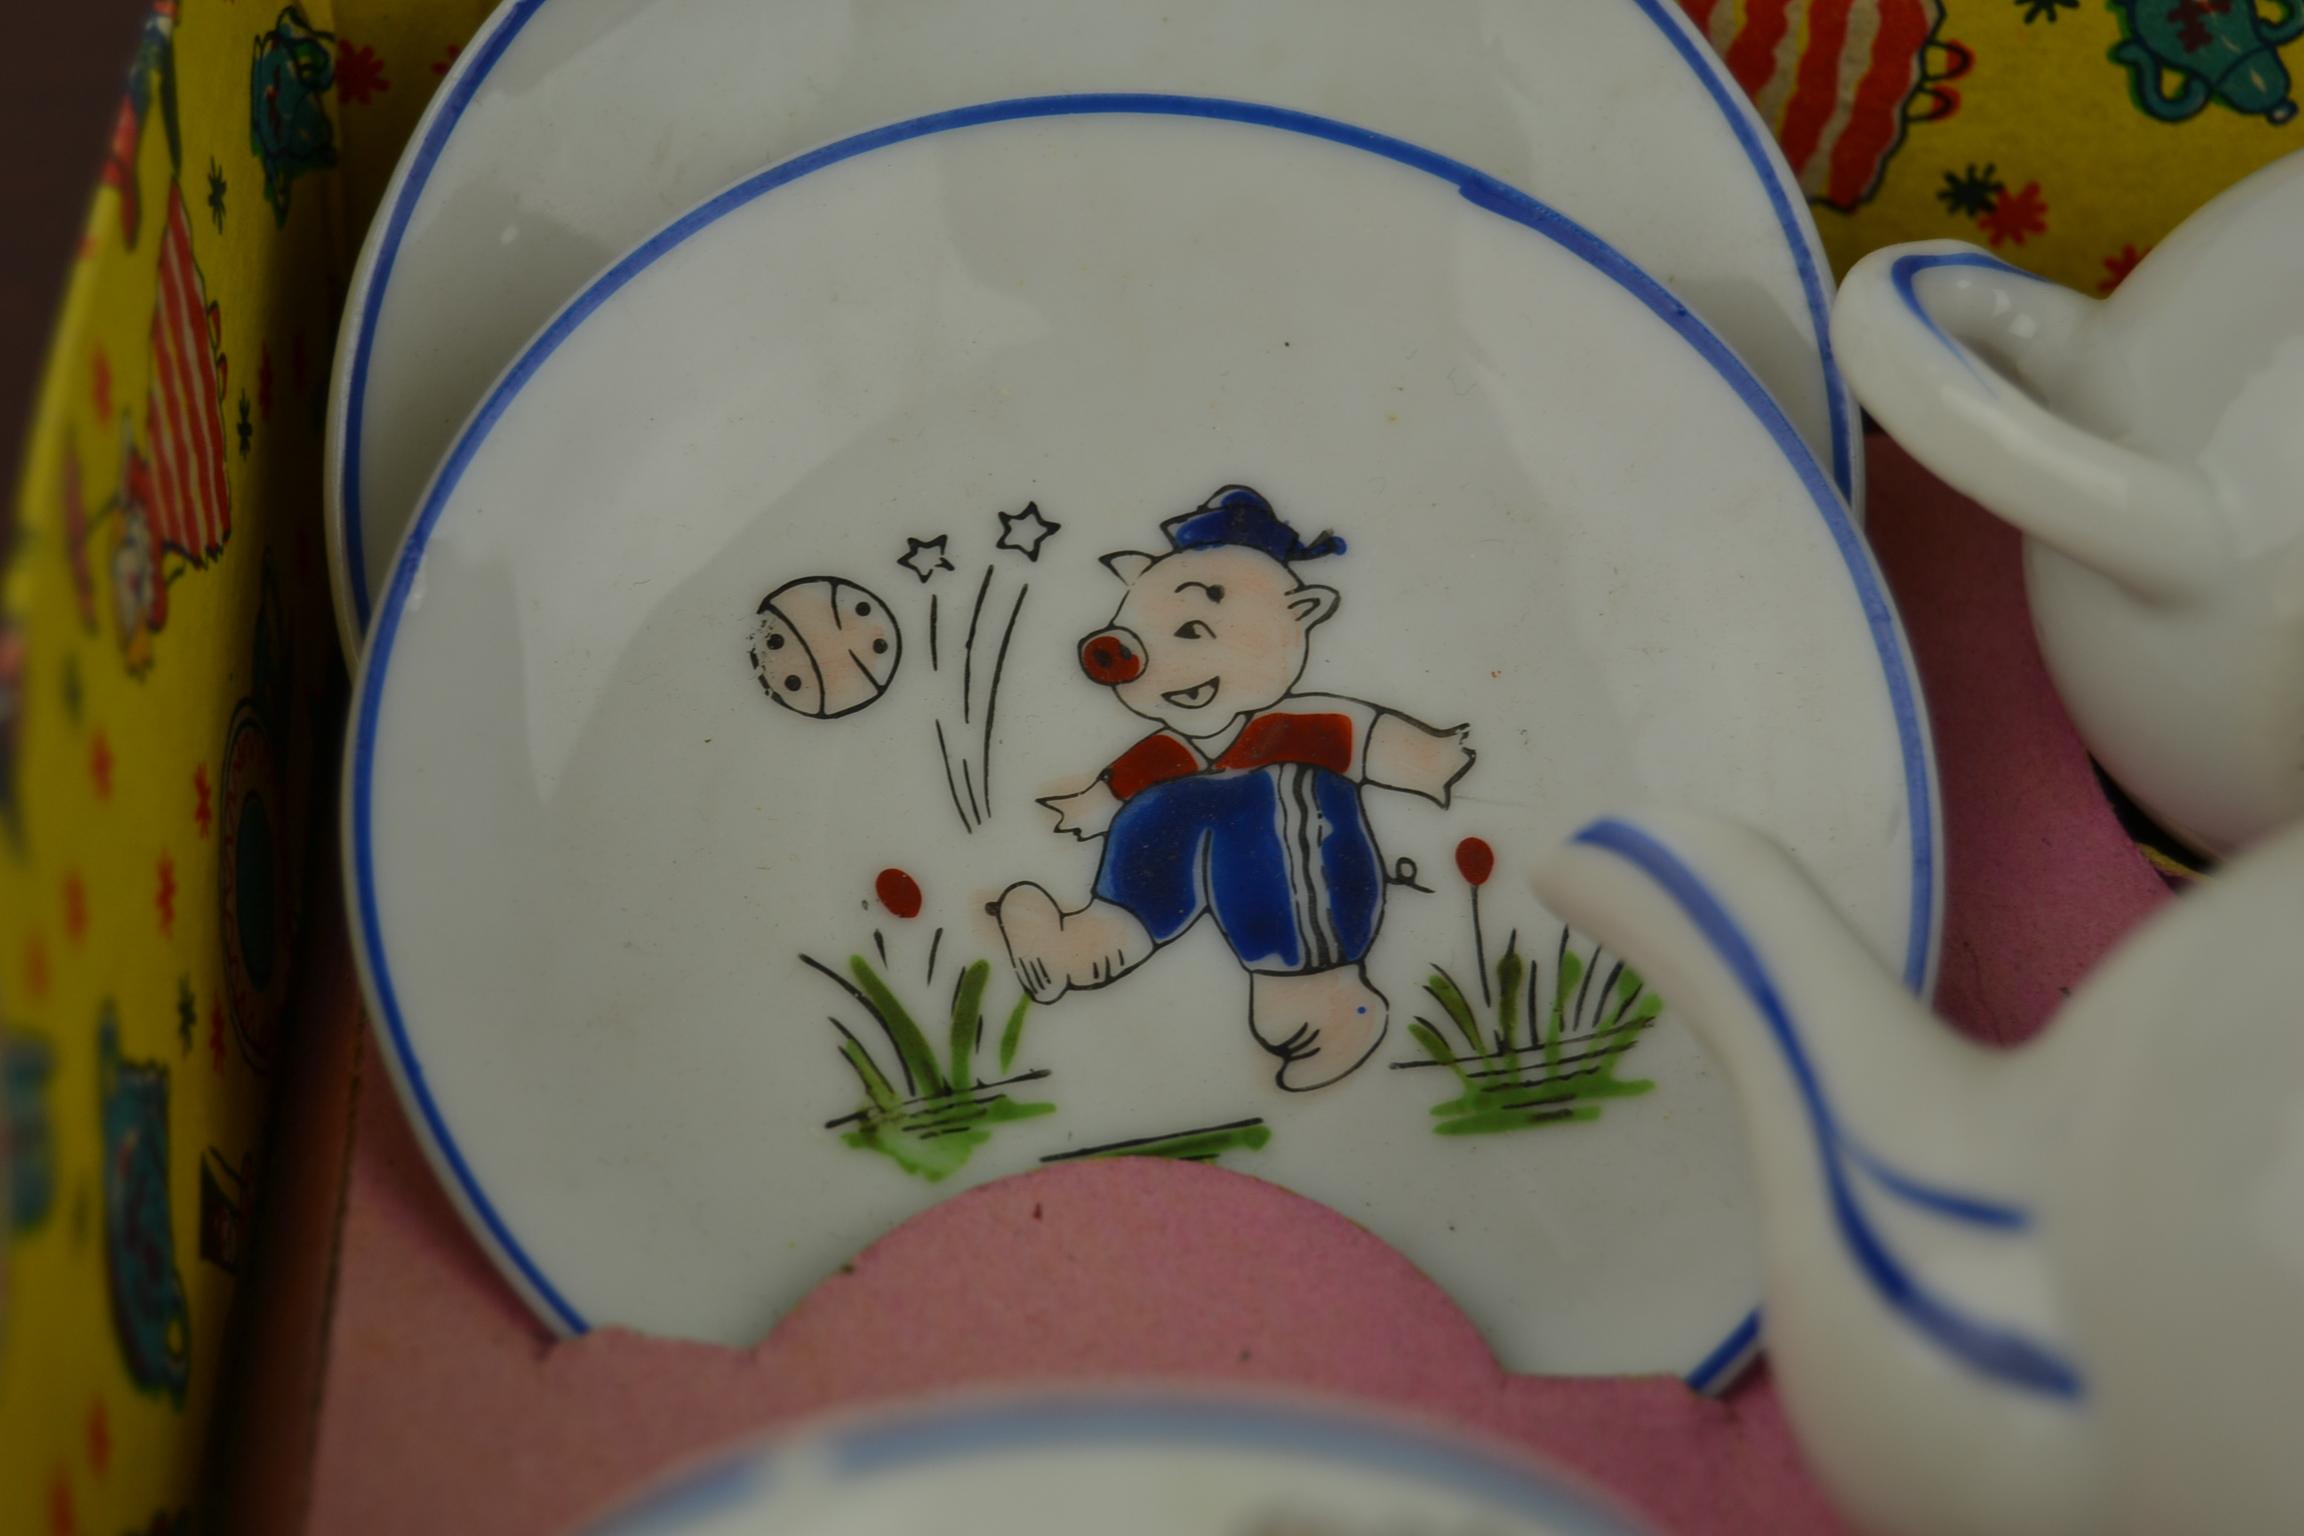 Vintage children's tea set - toy tableware set - miniature tea set with a pig playing football.
This porcelain set exists of four cups with saucers, teapot with cover, covered sugar bowl and milk jug.
This toy set is complete and displayed in his